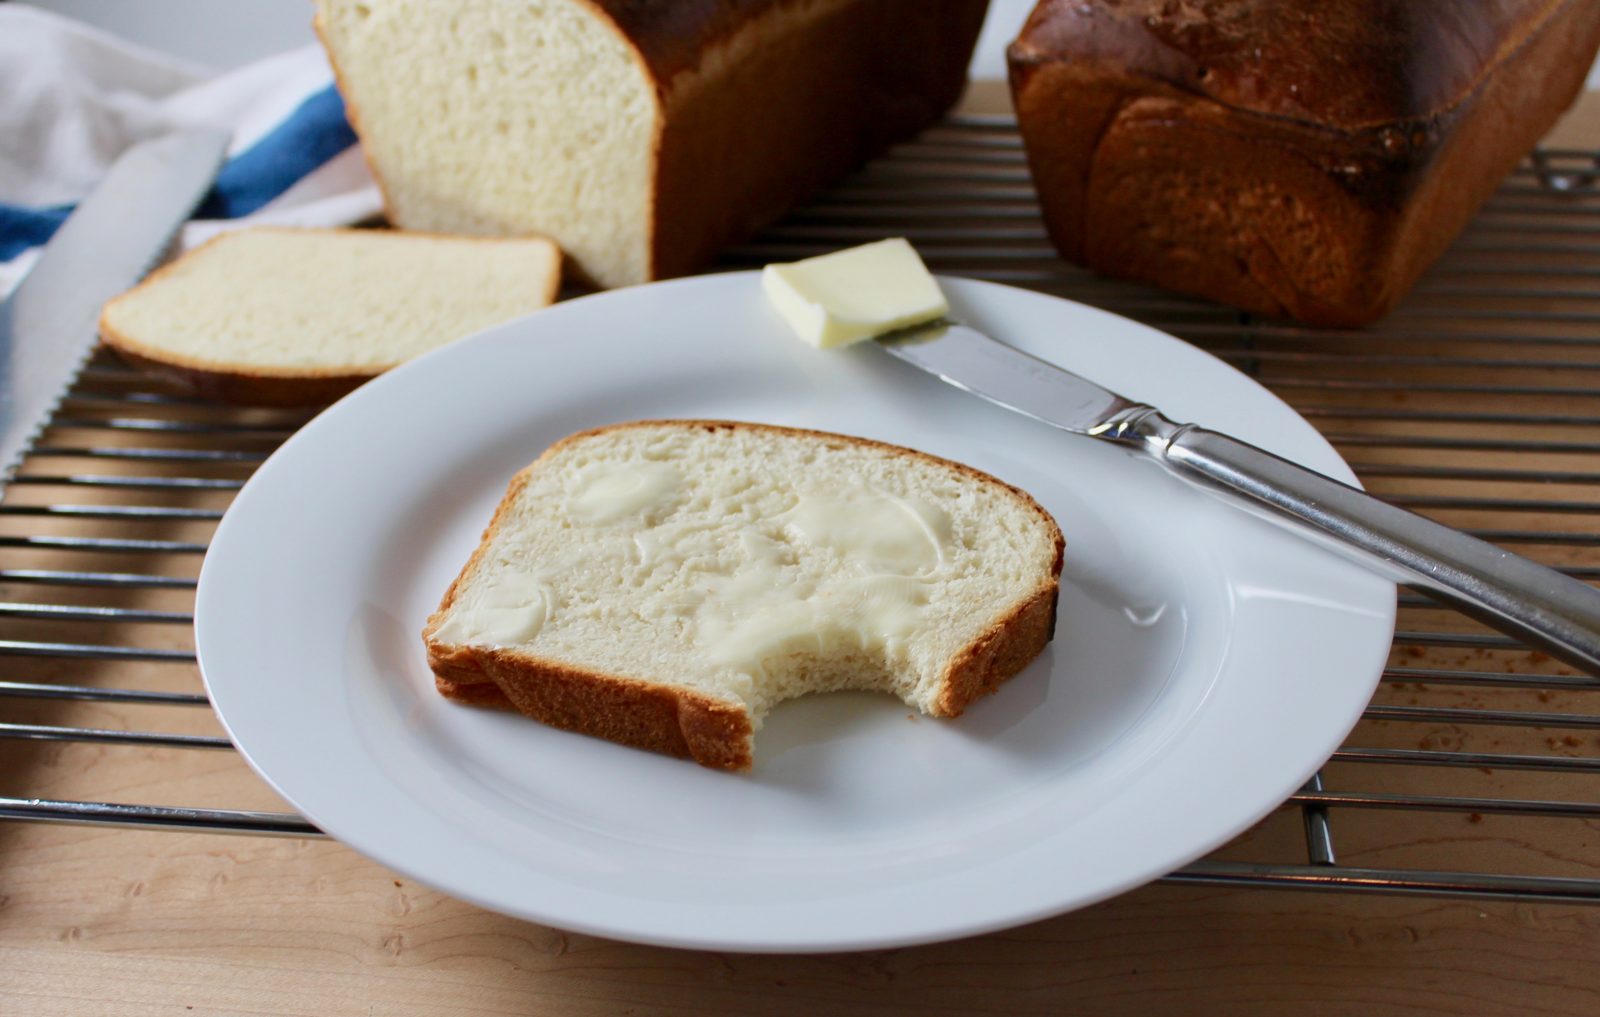 https://www.epicuricloud.com/wp-content/uploads/2020/03/Simple-Homemade-White-Bread-Buttered-1600x1017.jpg